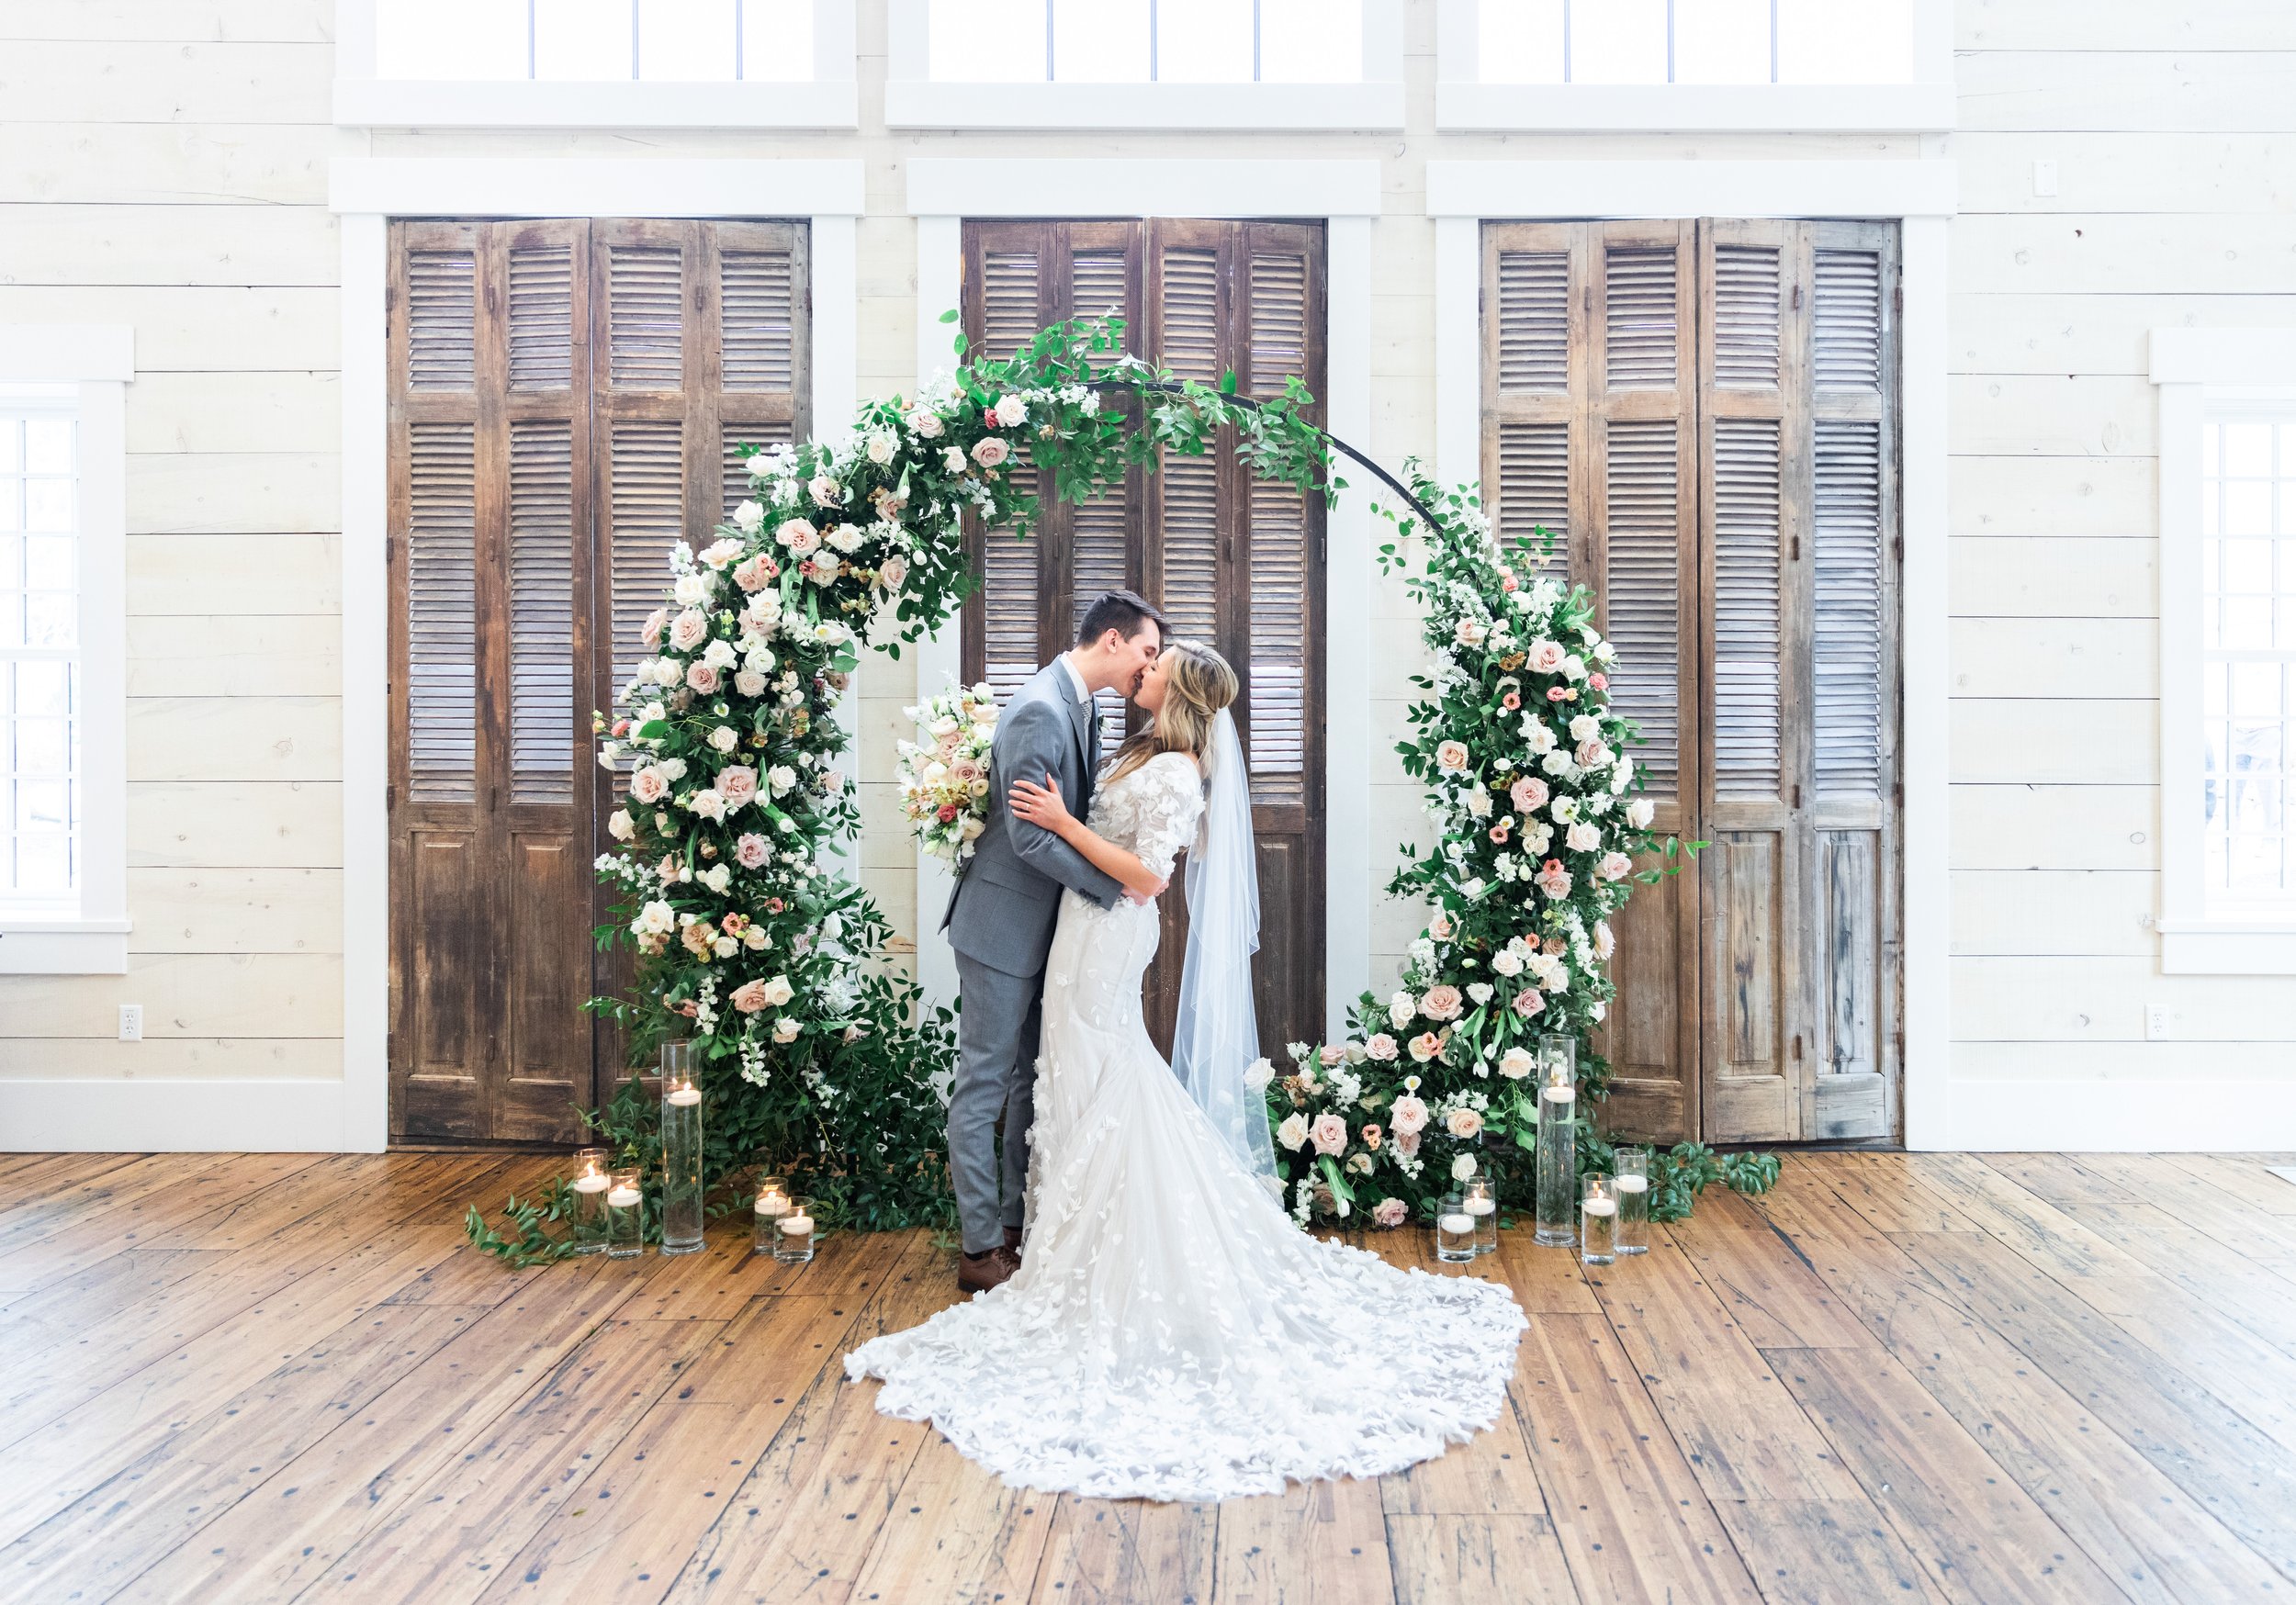  Utah wedding photographer Savanna Richardson Photography captures a couple kissing in front of a round floral altar. circle altars floral design #savannarichardsonphotography #utahvendor #utahweddingphotographer #MilleFleurDesign #Utahweddingdesigns